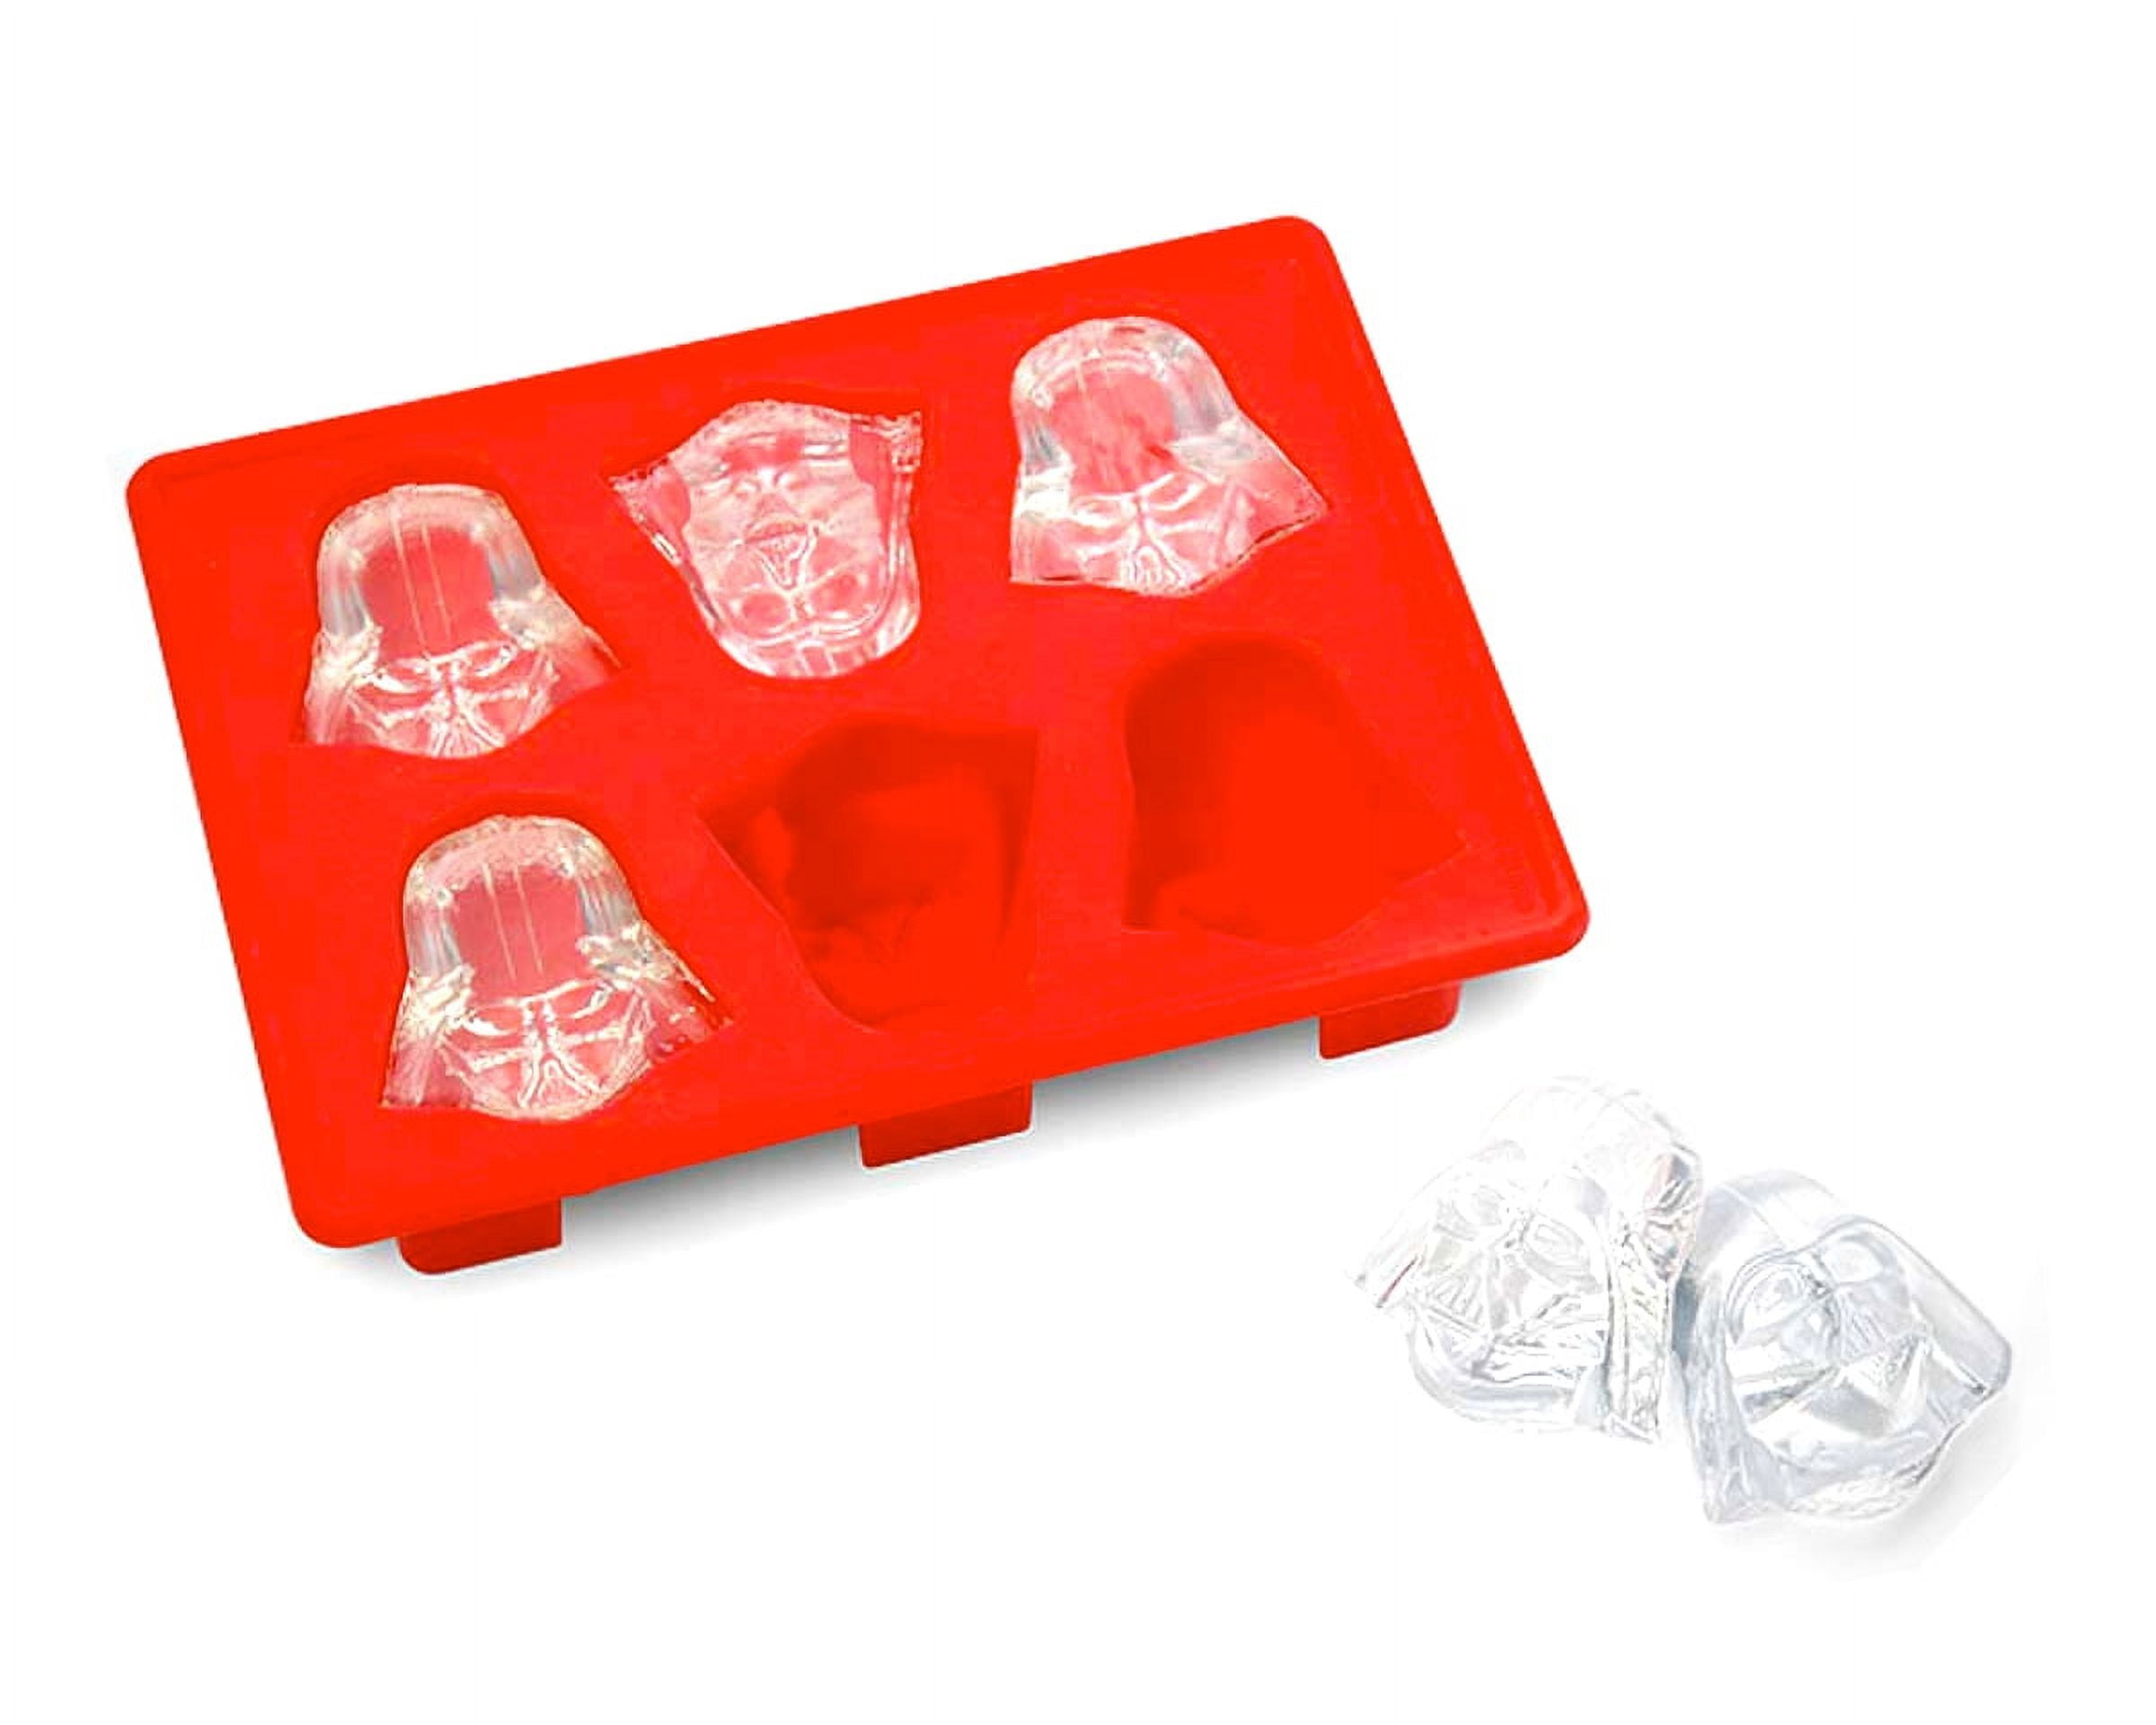 Ice Tray Star Wars Villains Ice Silicone Mold for Ice Cube or Chocolate  Creations 